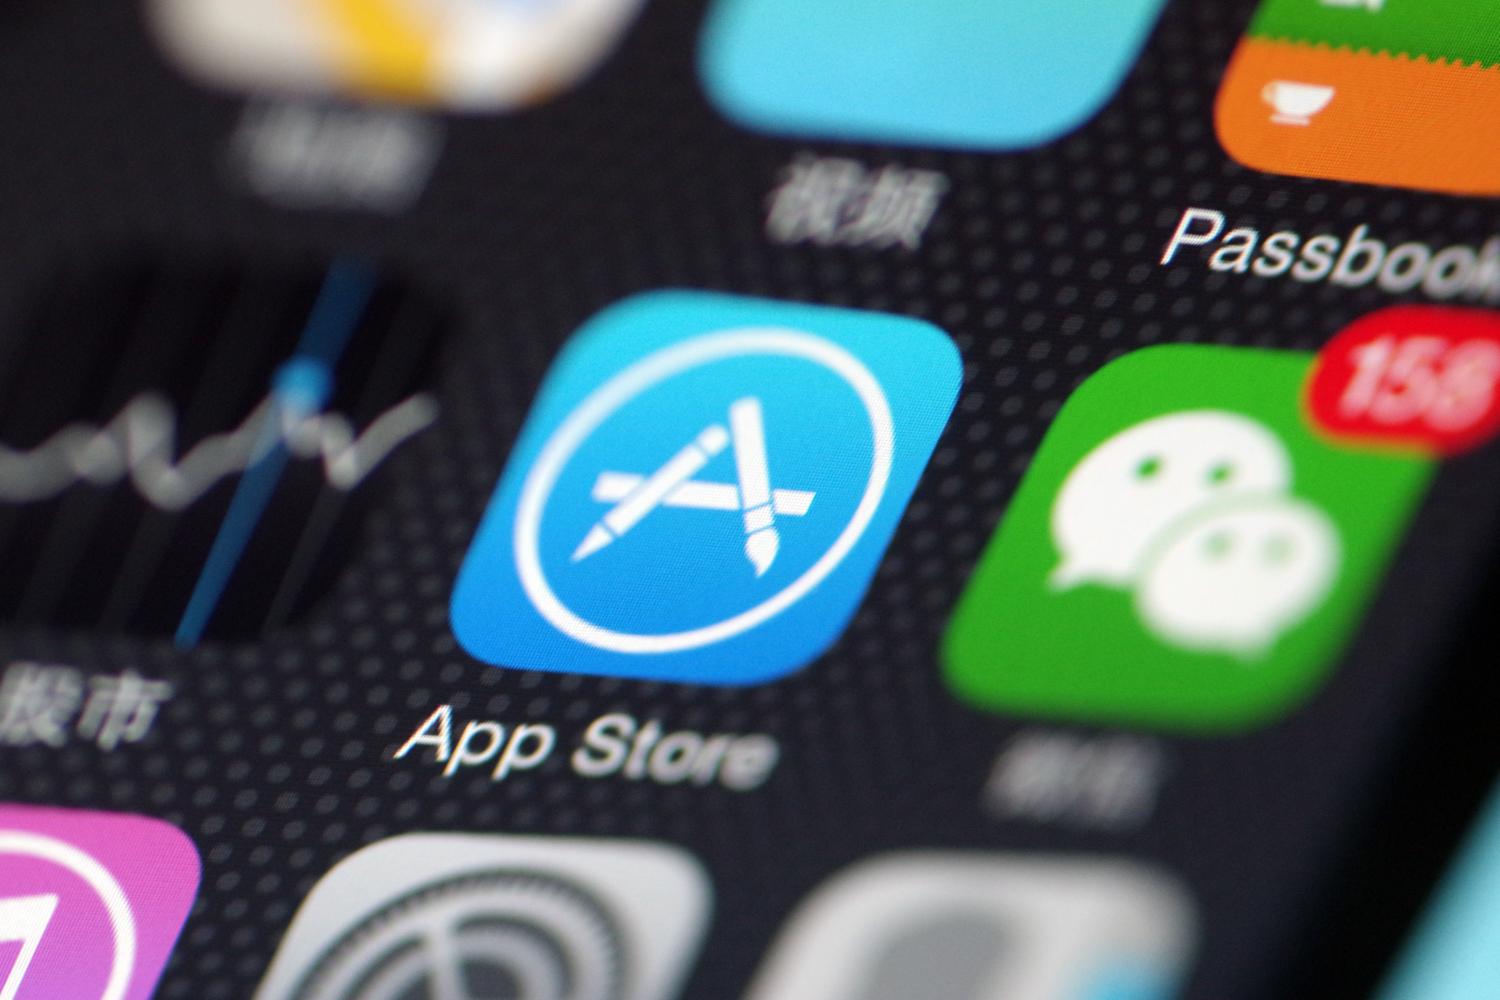 --FILE--A Chinese mobile phone user shows the icons of App Store app, left, and messaging app Weixin, or WeChat, of Tencent on his iPhone smartphone in Ji'nan city, east China's Shandong province, 27 June 2017.Apple China said it will not take the blame for developers who charge differently on the iOS app and Android versions for the same product or service. Netizens have found they need to pay more on iOS than Android in using the same ride-sharing or video subscription services. Some Internet companies have reportedly adopted differential pricing plans through the use of Big Data based on a customer's buying behavior or interest, so a new customer may pay less than an old customer for the same product or service.No Use China. No Use France.